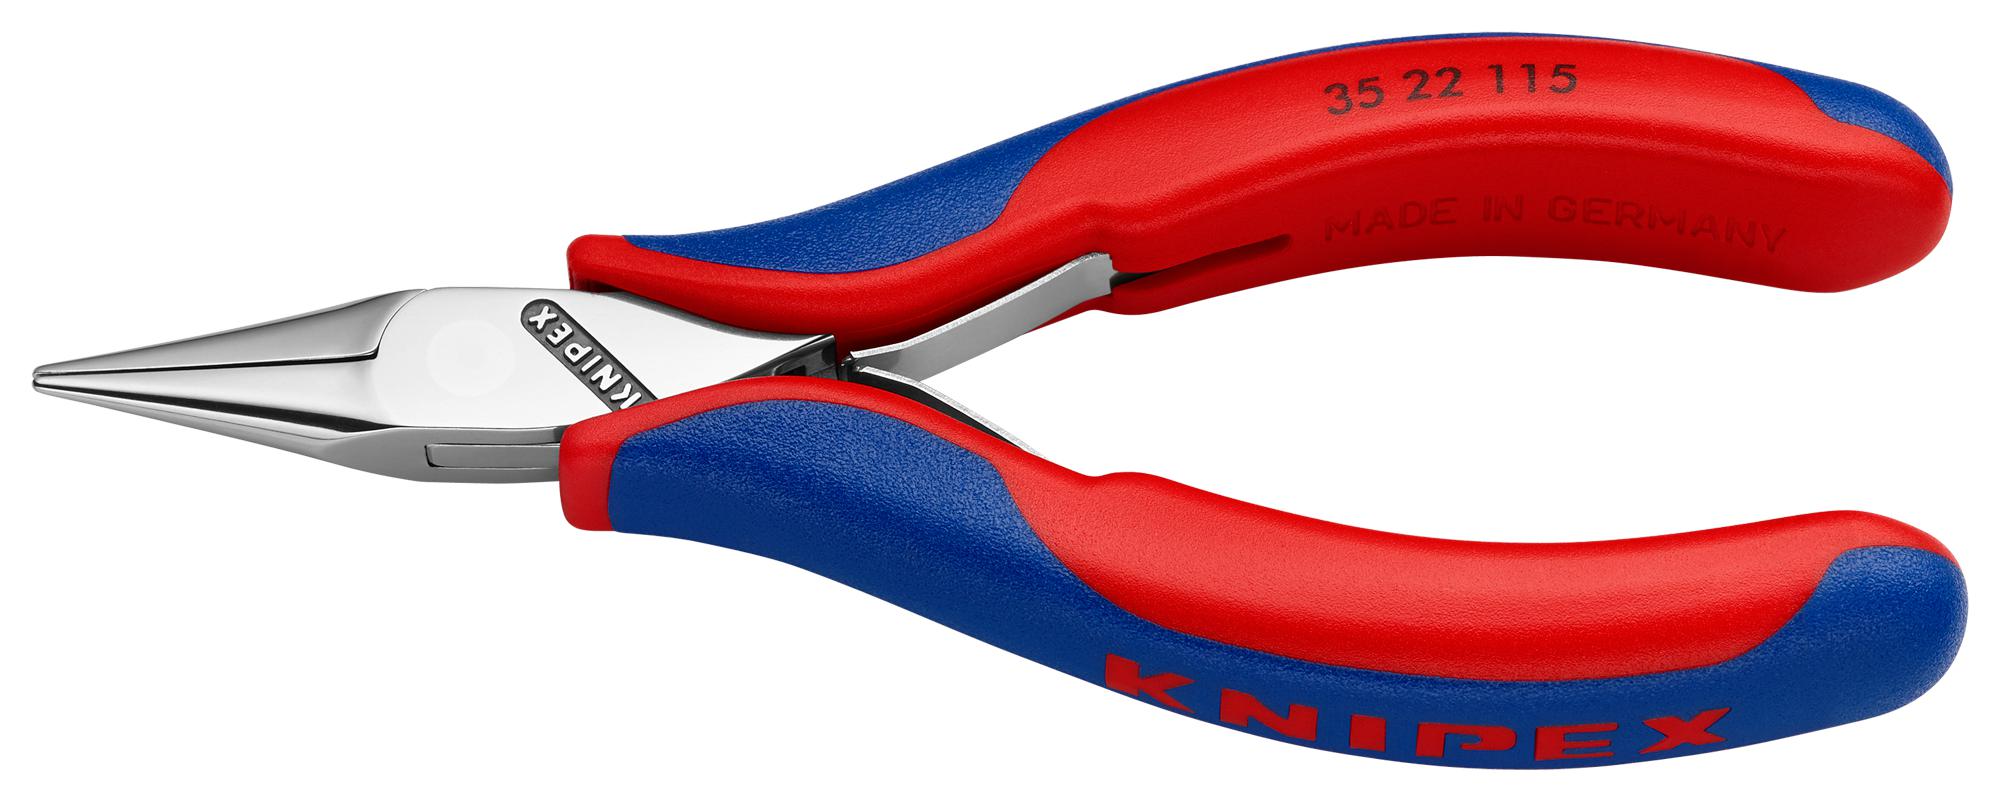 Knipex 35 22 115 Relay Adjusting Pliers